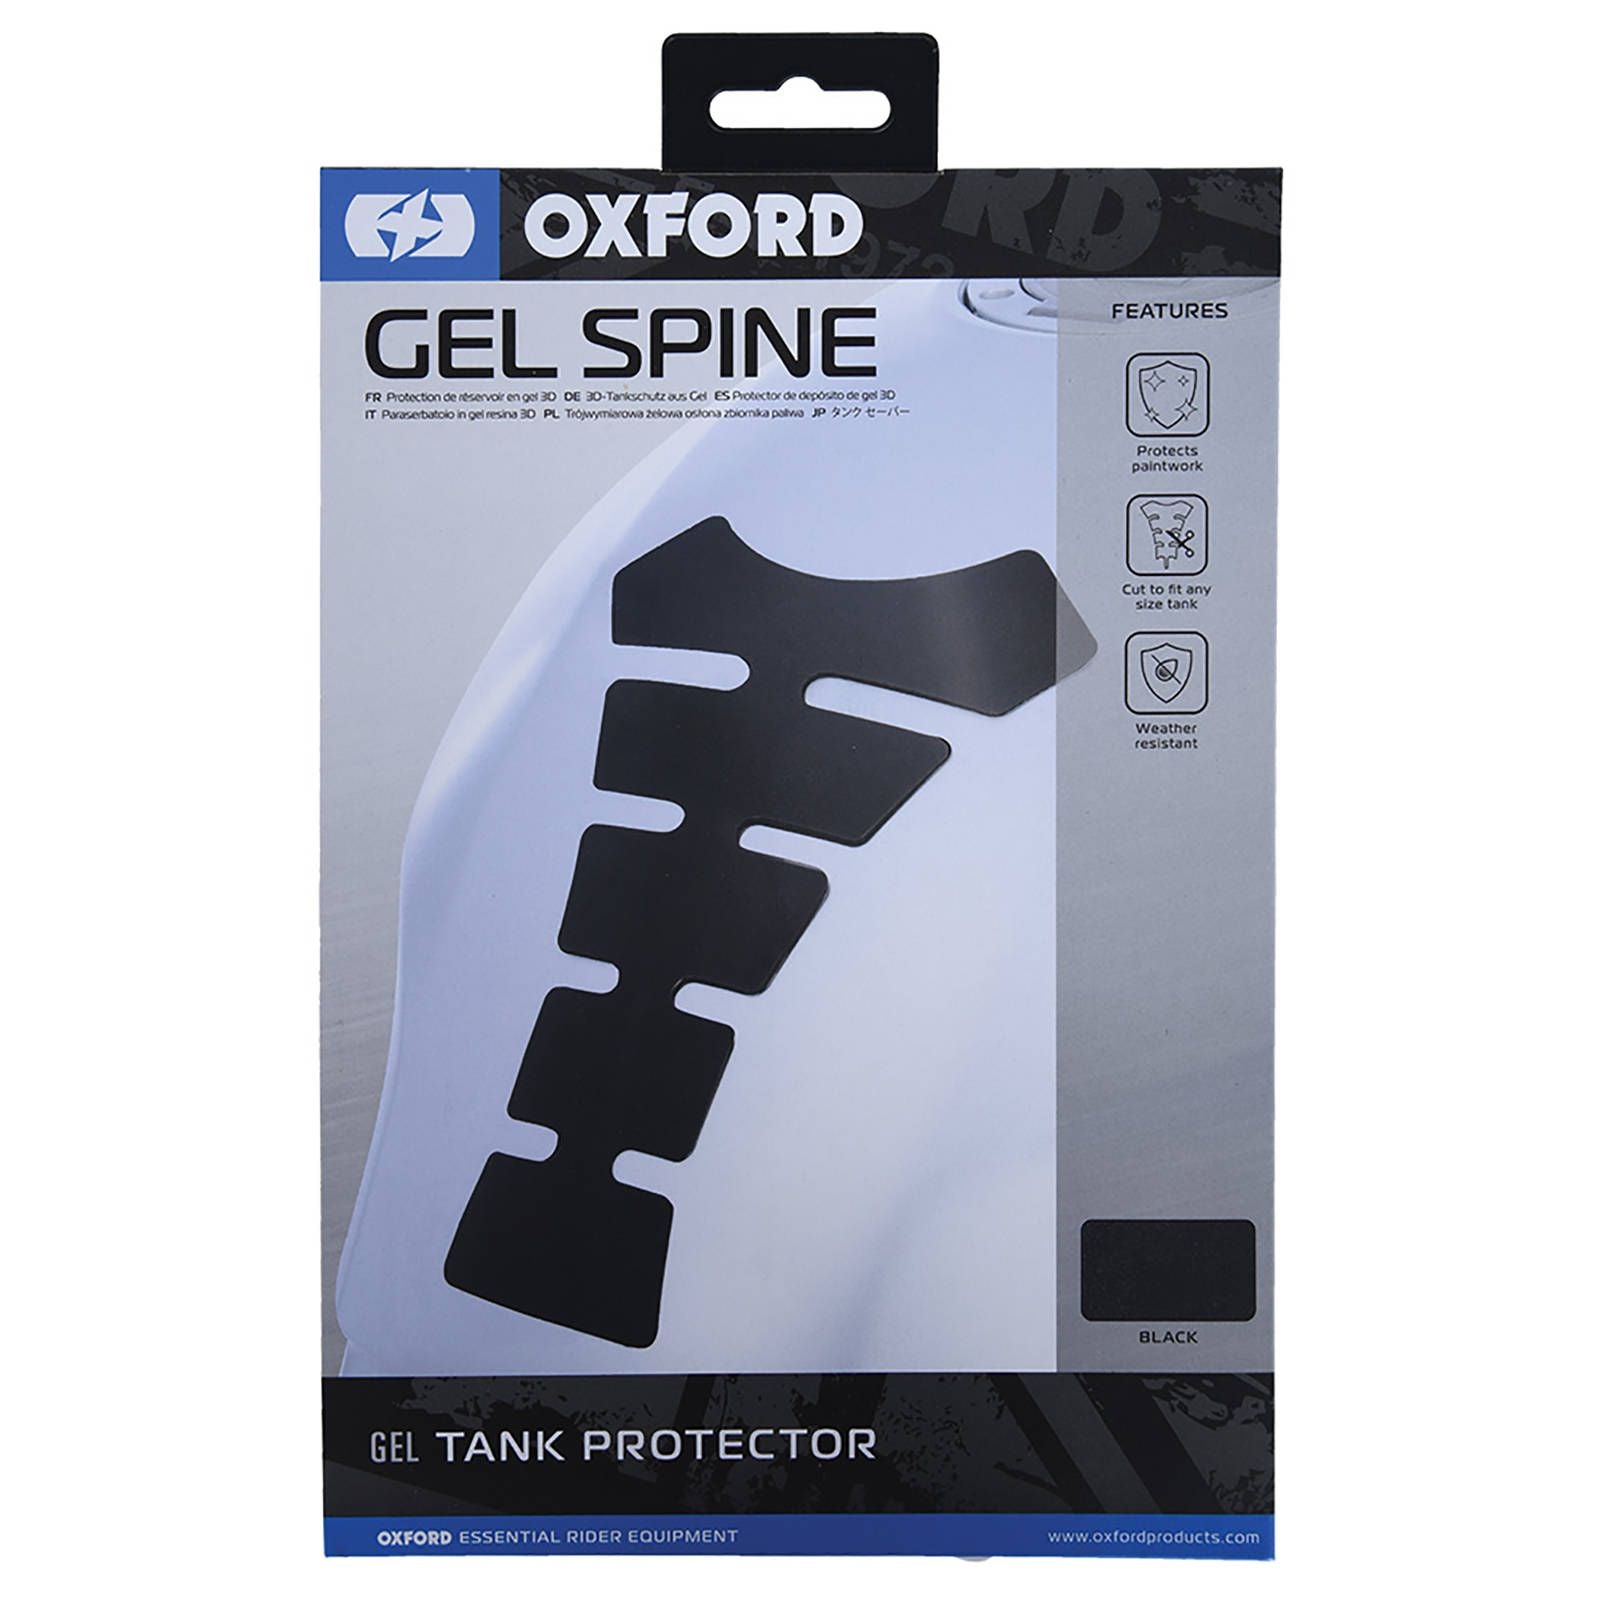 New OXFORD Original Spine Gel Tank Pad - Black (Replaces Oxof838) #OXOX651